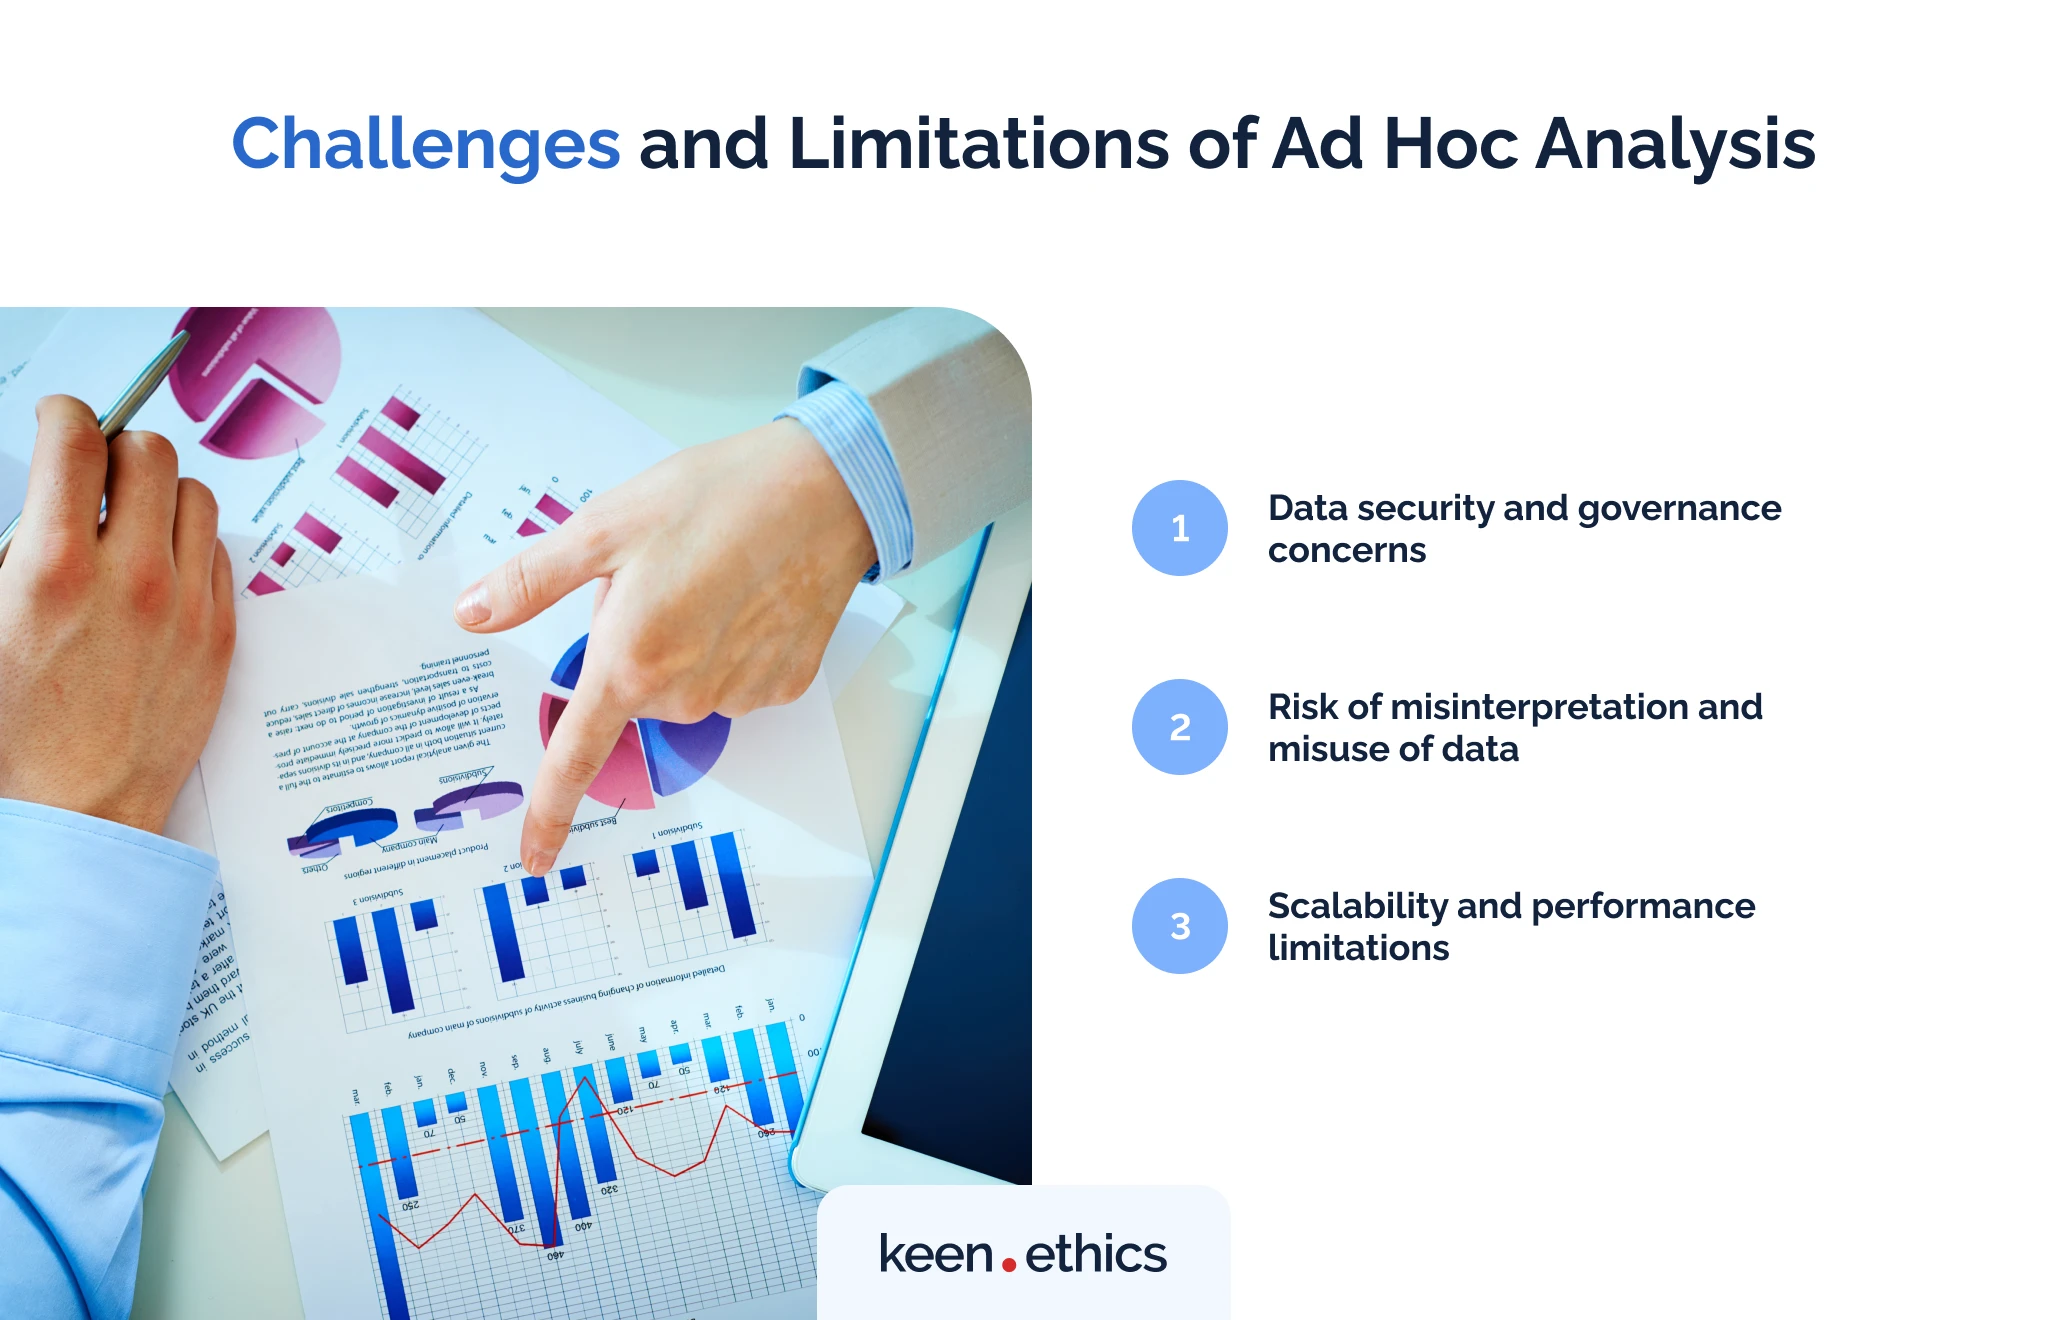 Challenges and limitations of ad hoc analysis